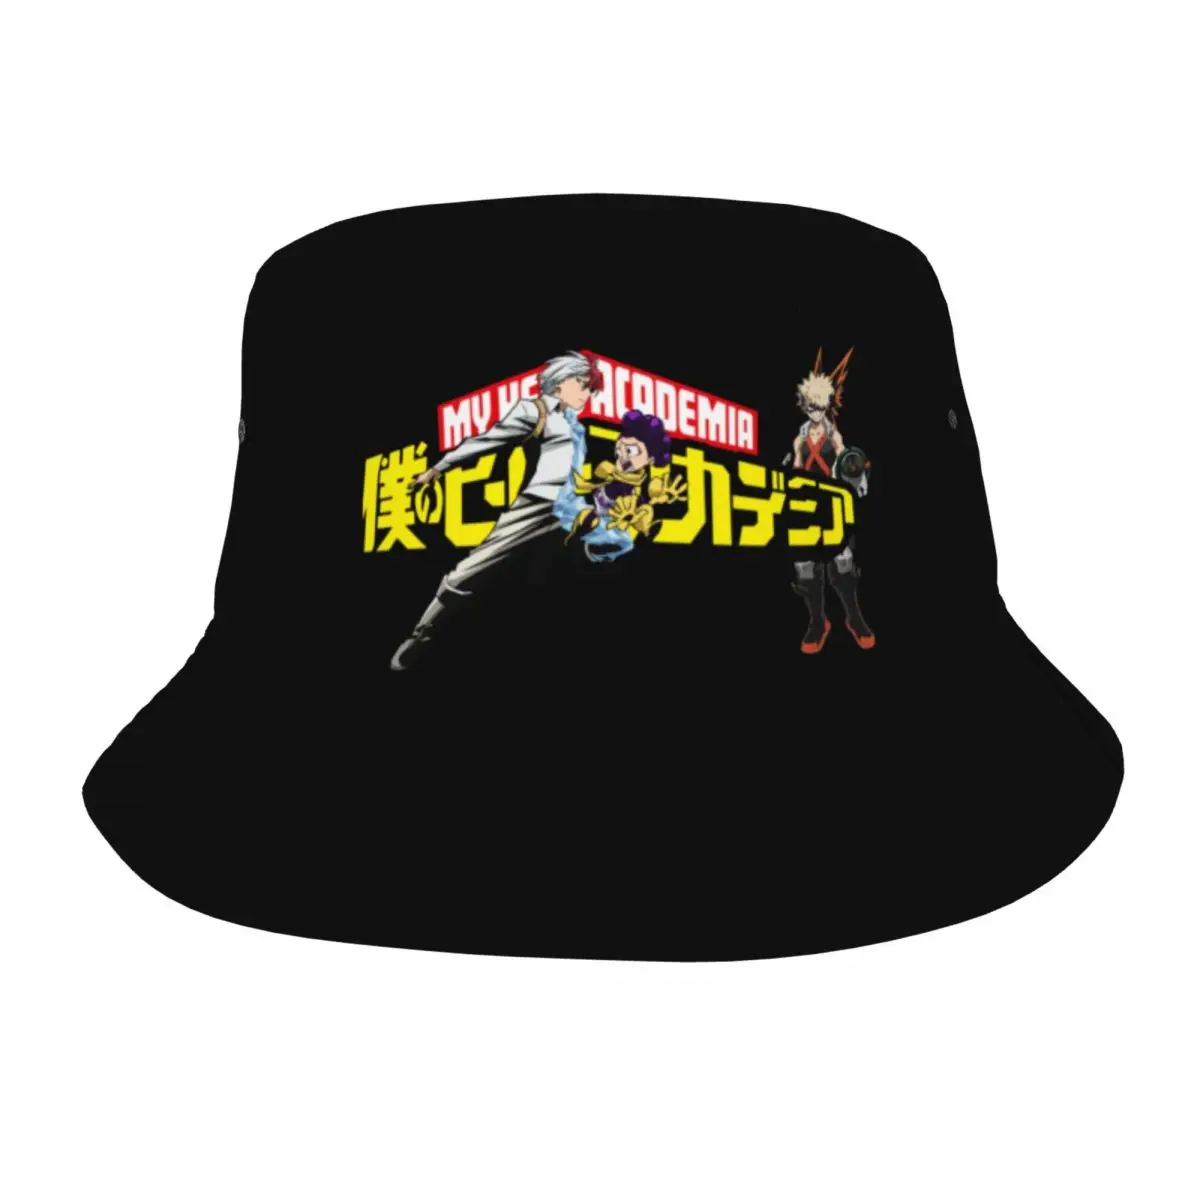 For Teen Beach Boku No My Hero Academia Anime Sun Hats Stylish Packable For Fishing Hats Boonie Hat